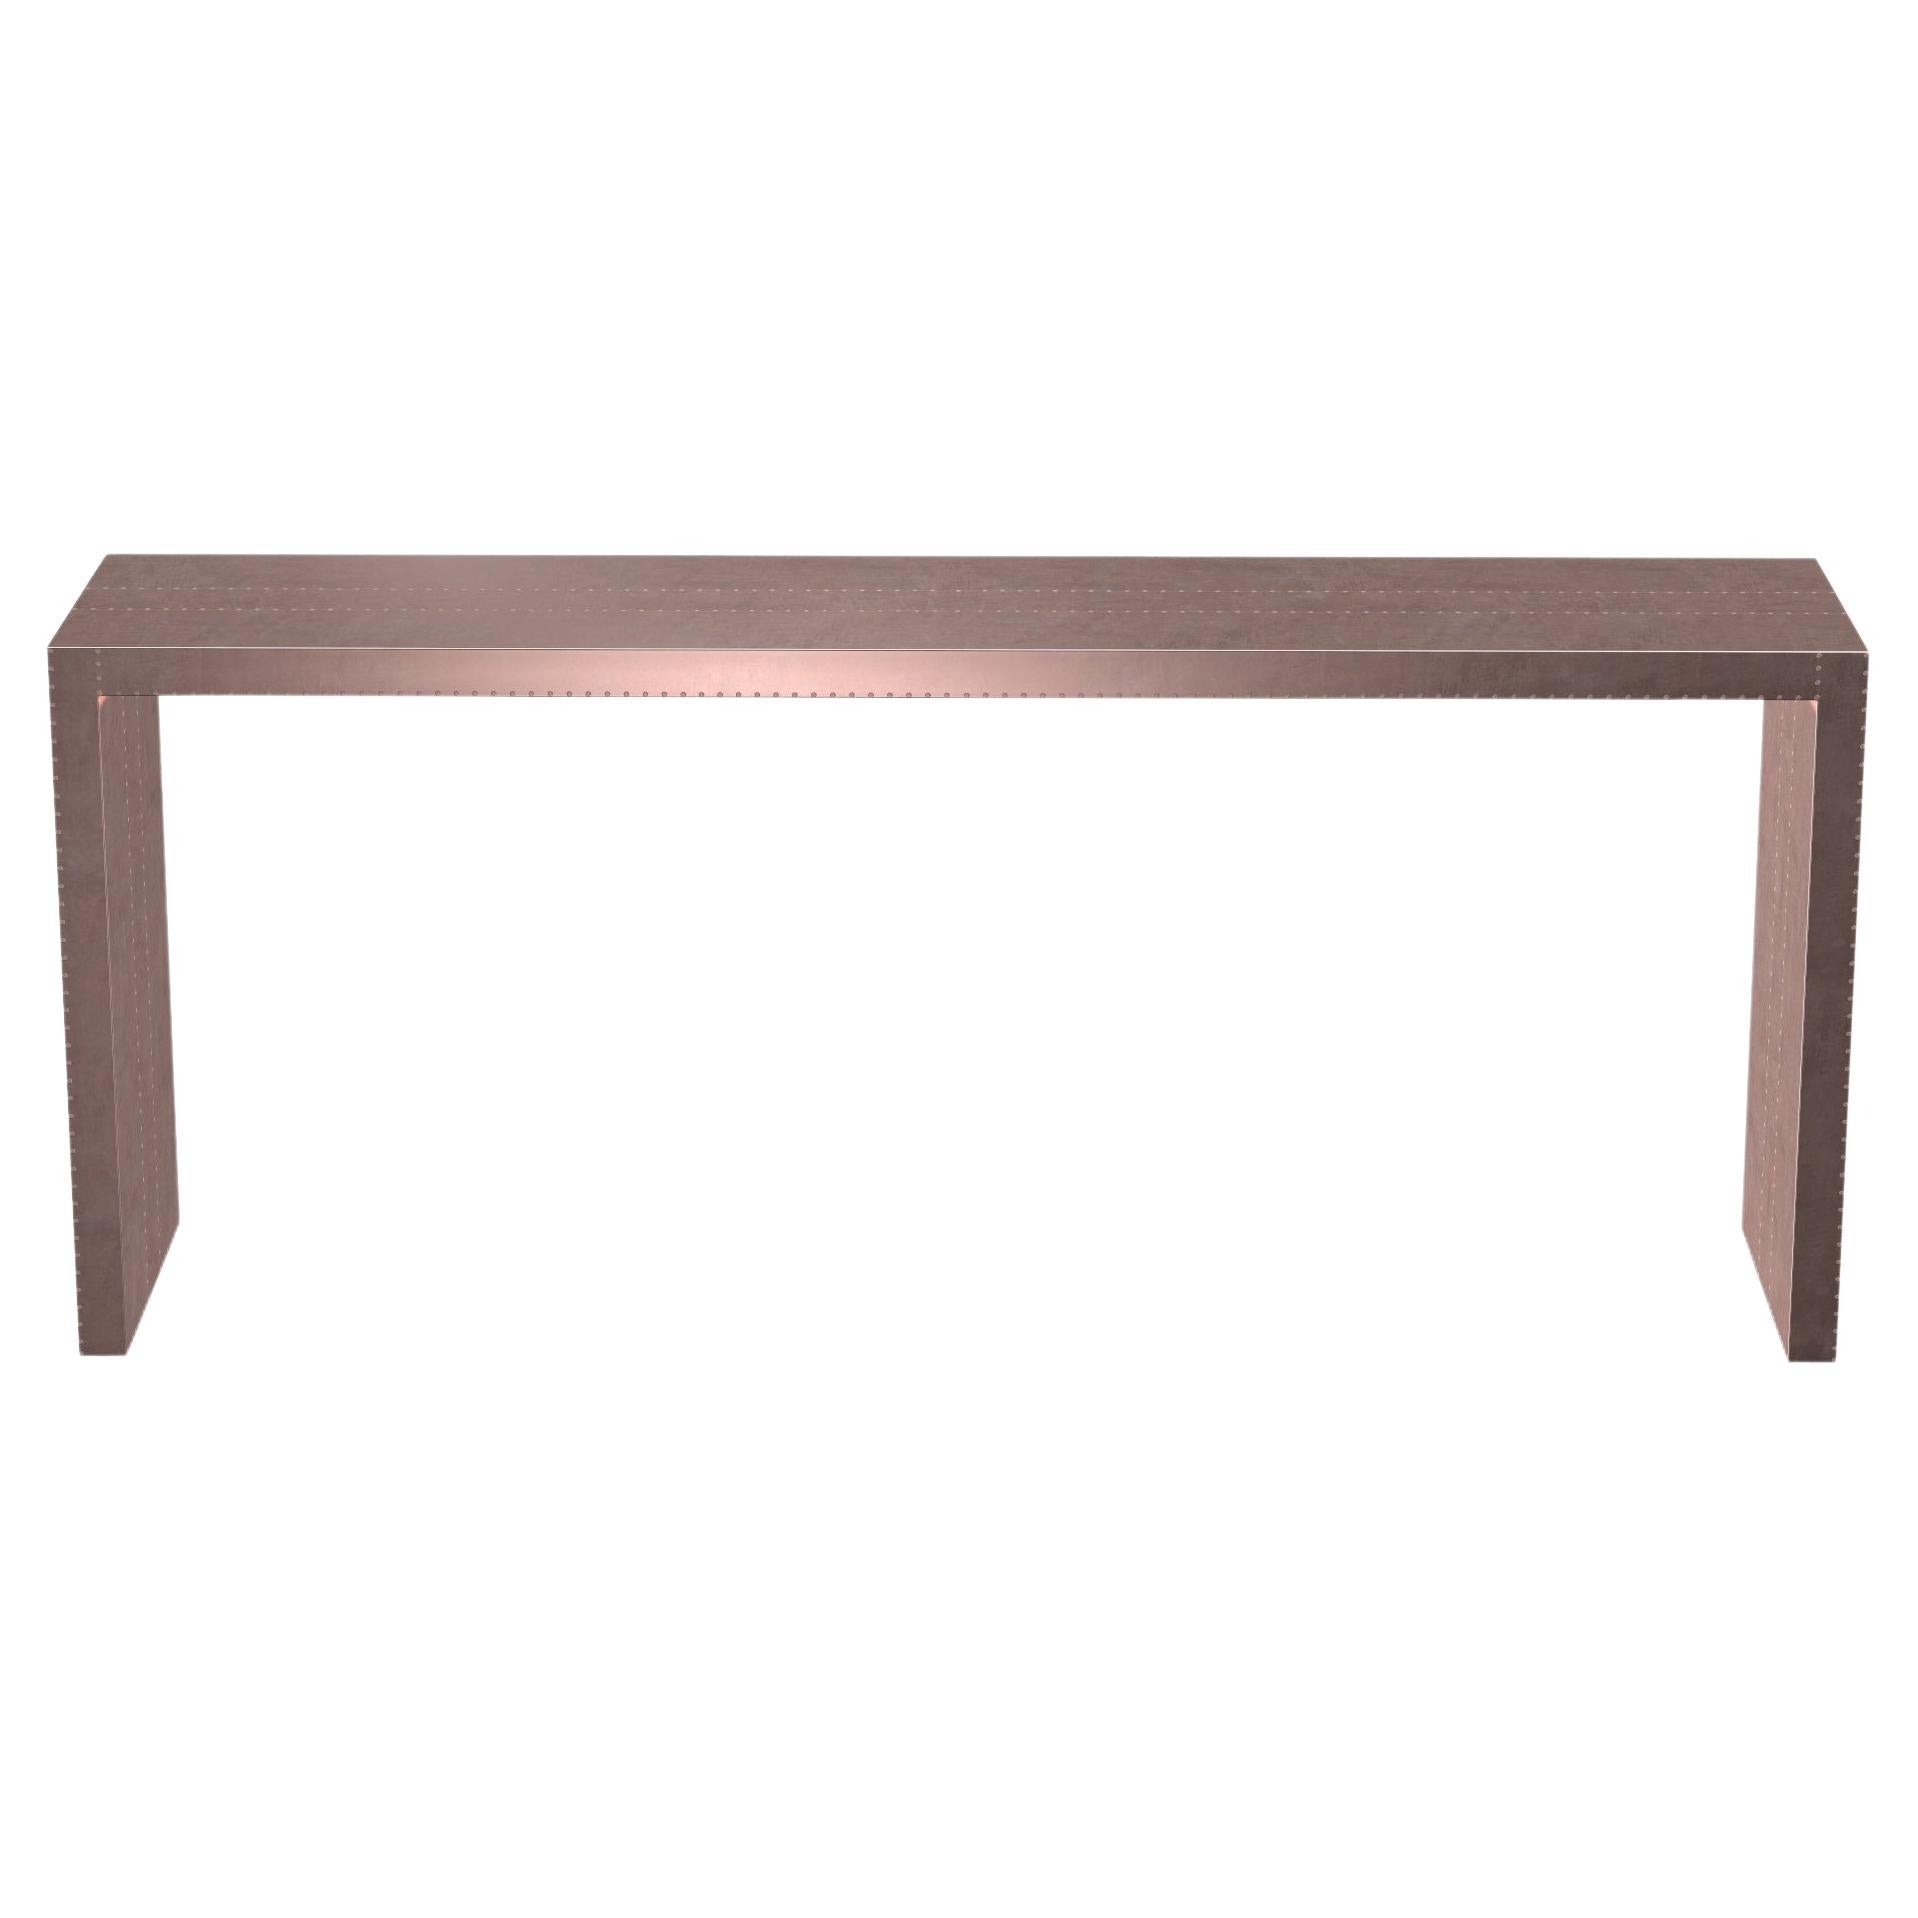 Art Deco Industrial and Work Tables Rectangular Console in Smooth Copper  For Sale